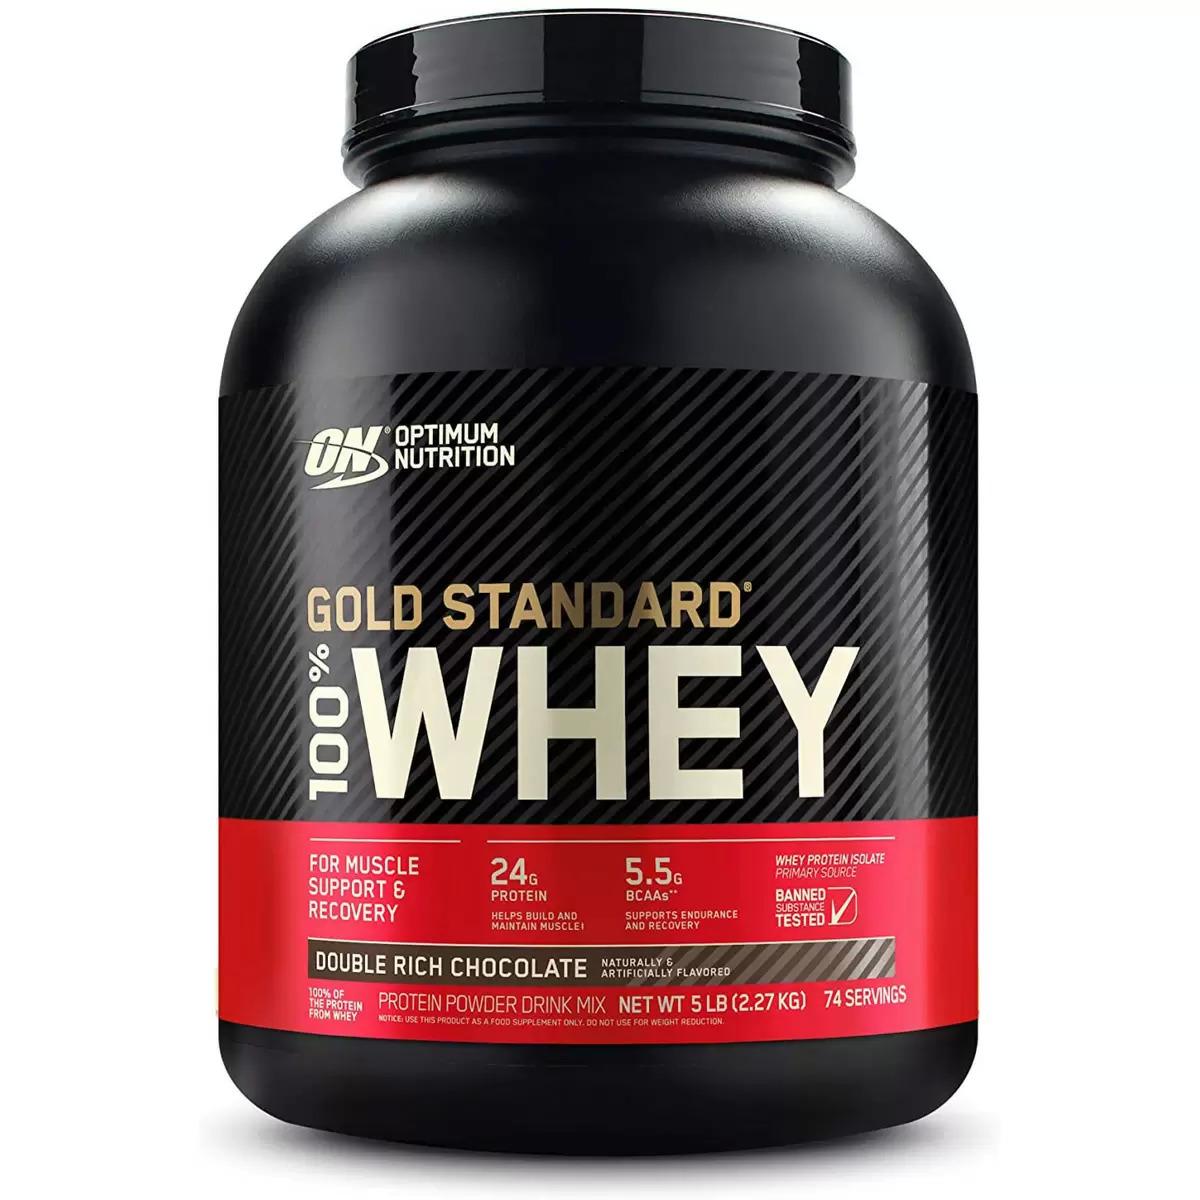 Optimum Nutrition Gold Standard Whey Protein Powder Chocolate Malt for $50.99 Shipped